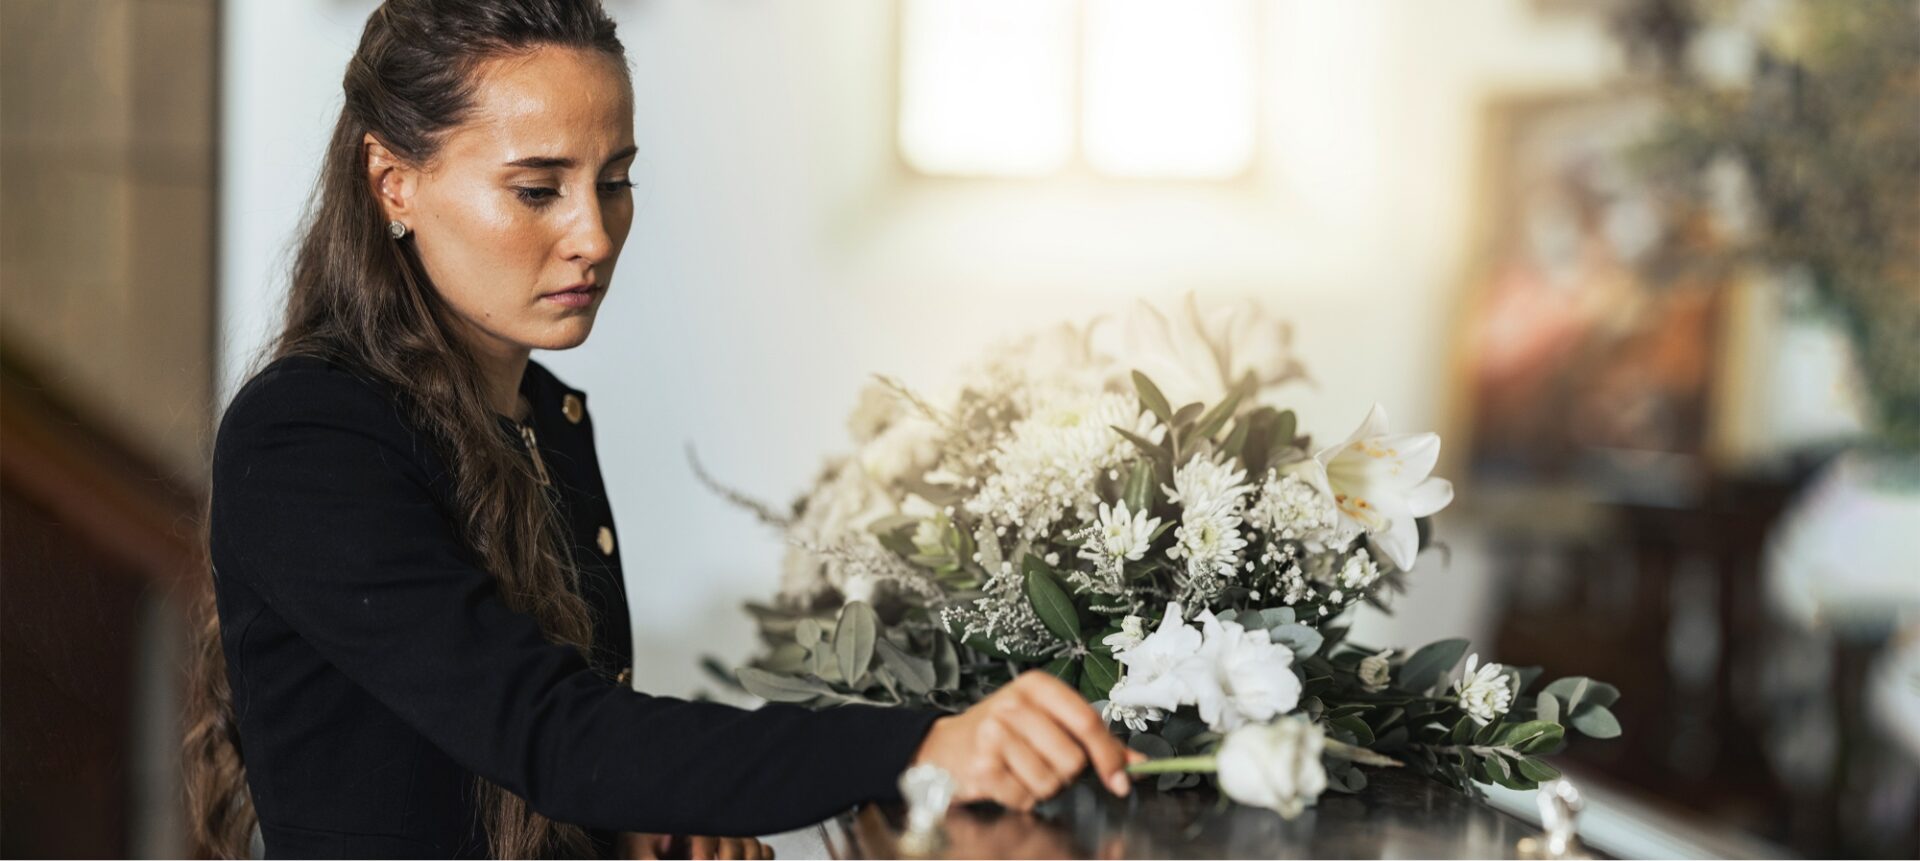 A woman placing flowers down at a funeral